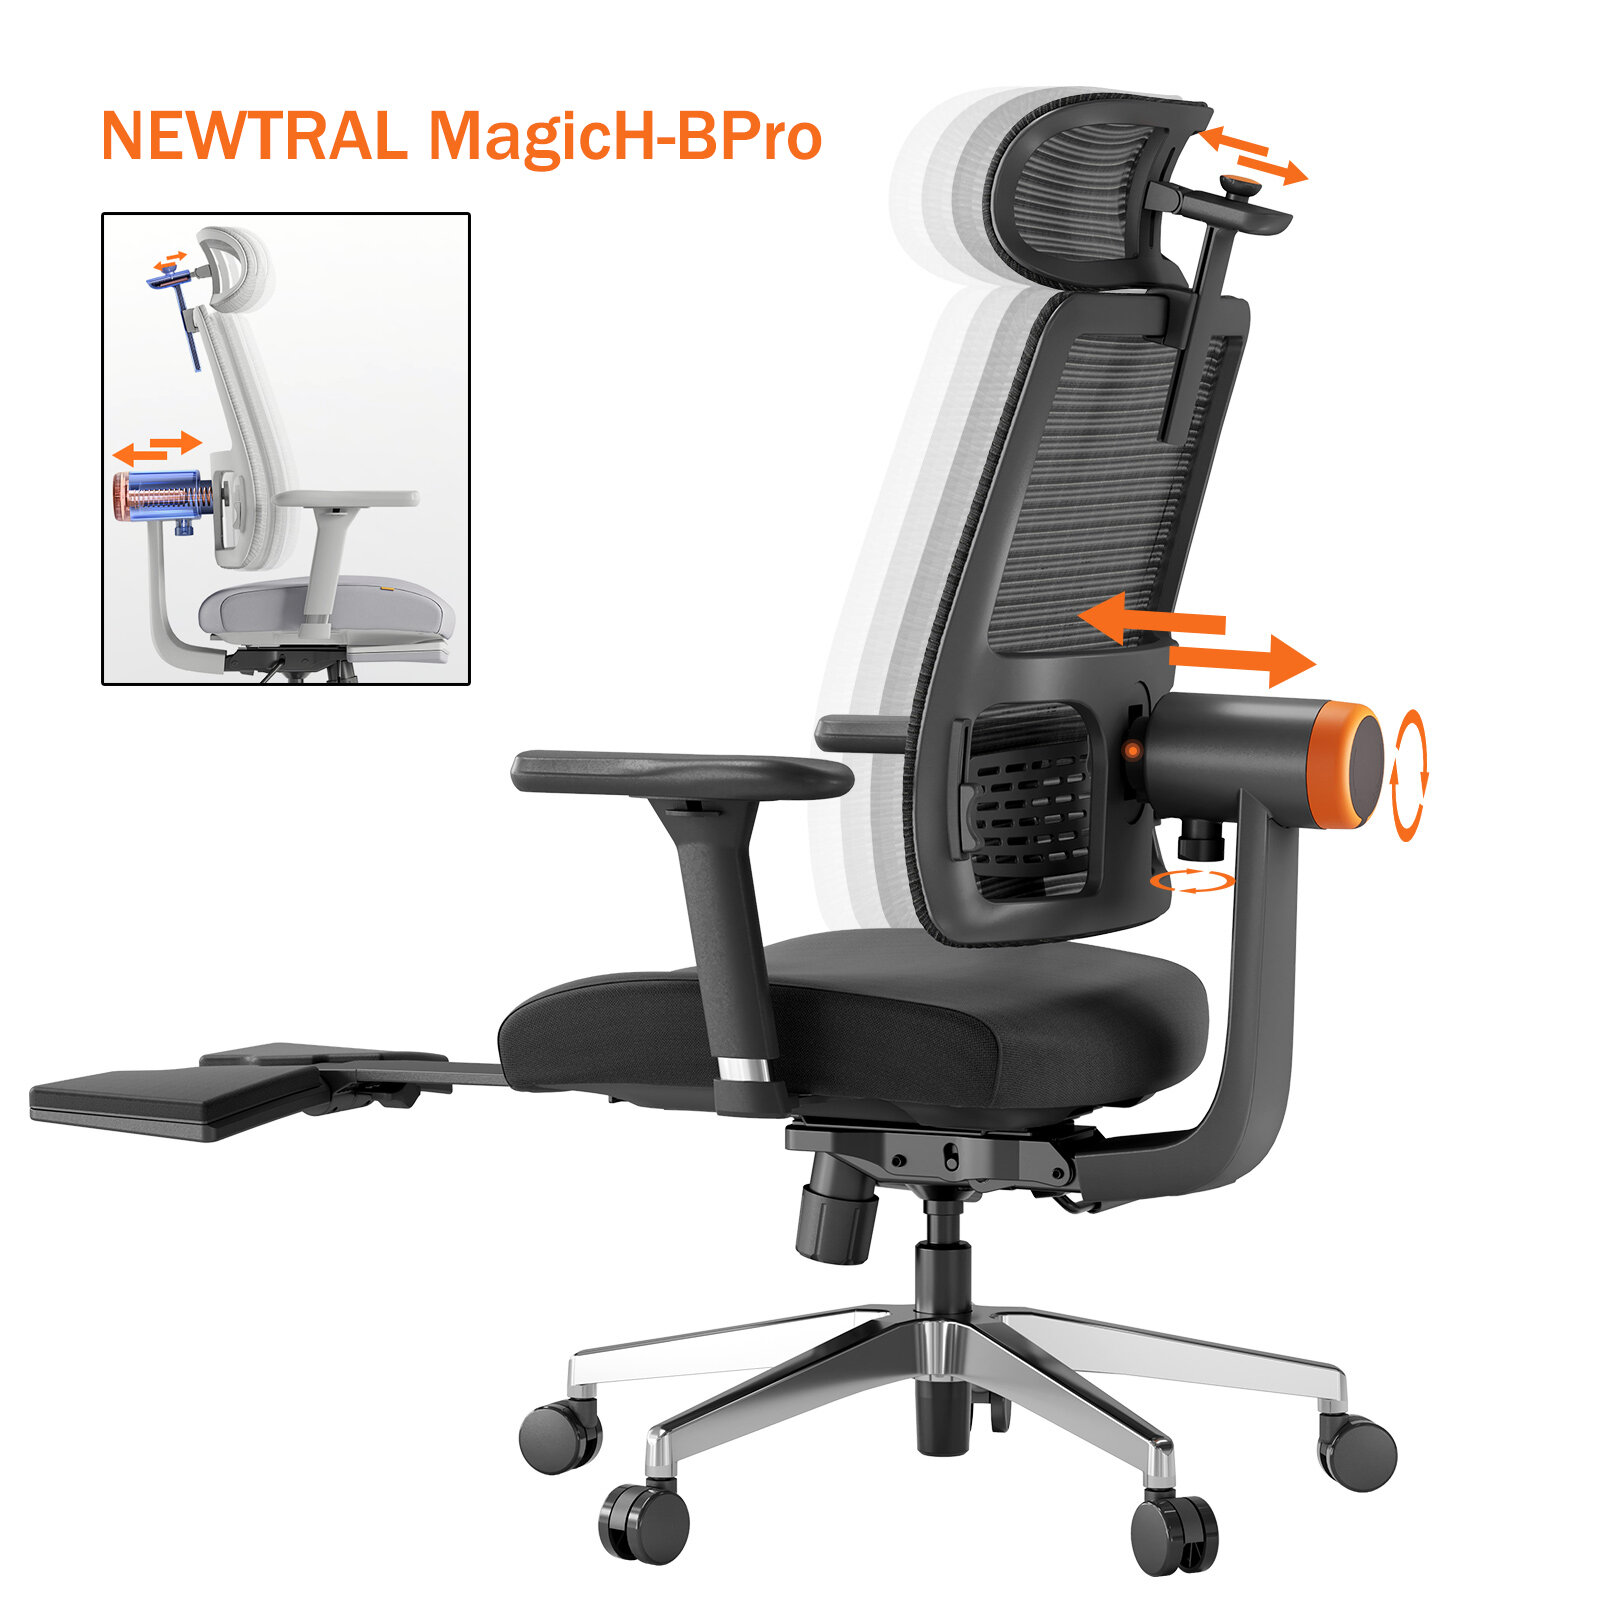 NEWTRAL MagicH-BPro Ergonomic Chair with Footrest, Auto-Following Backrest Headrest, Adaptive Lower Back Support, Adjust